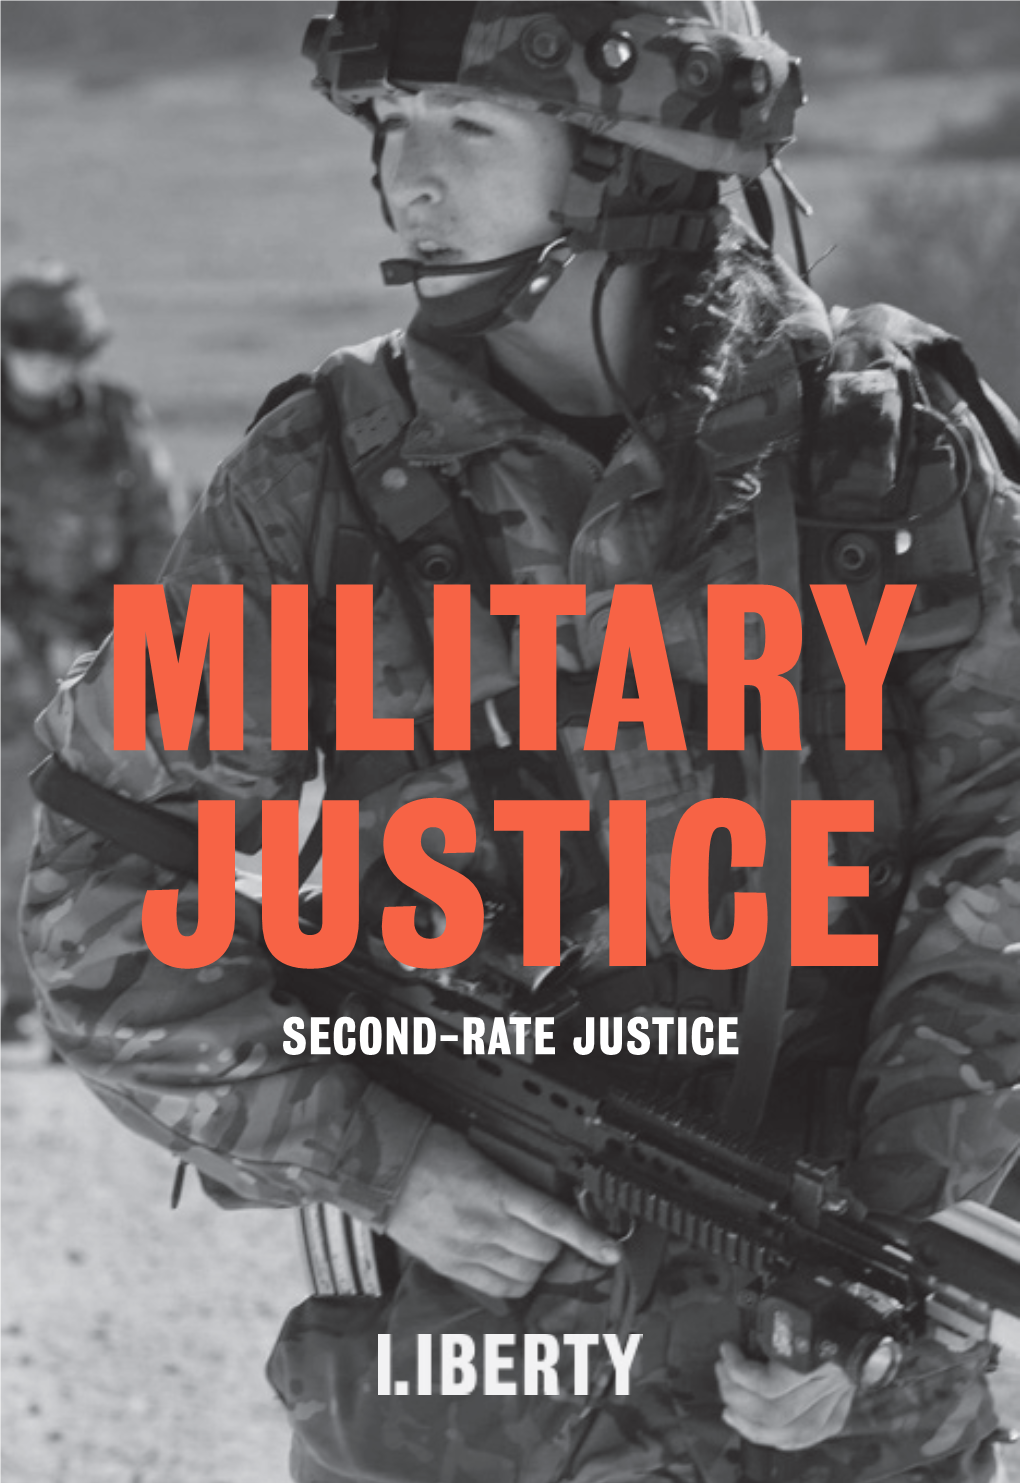 Second-Rate Justice Military Justice January 2019 Military Justice